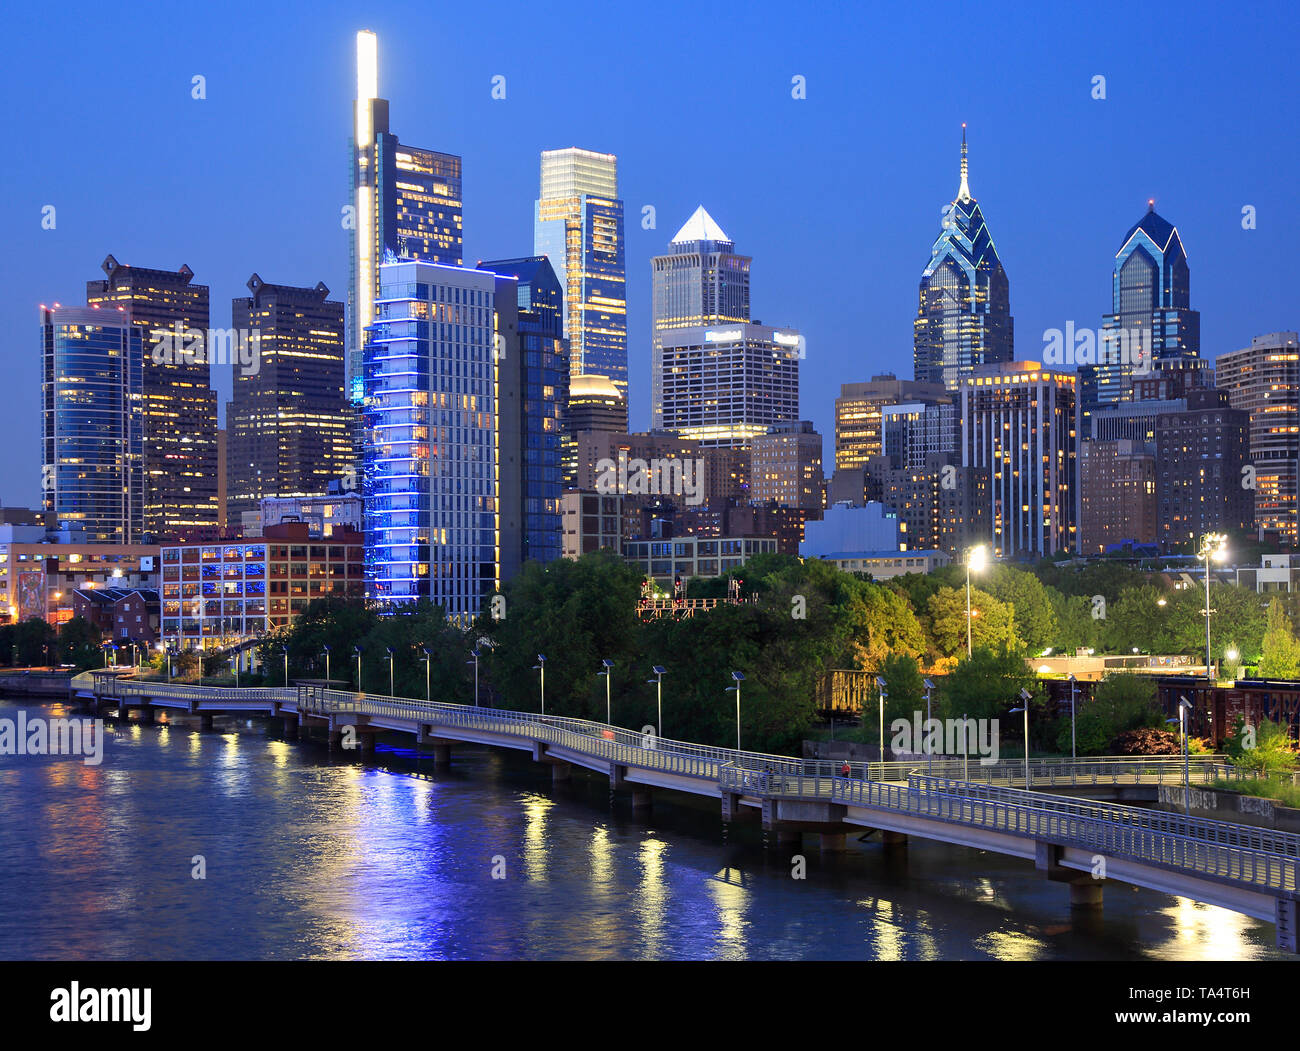 Philadelphia skyline at night with the Schuylkill River on the foreground Stock Photo